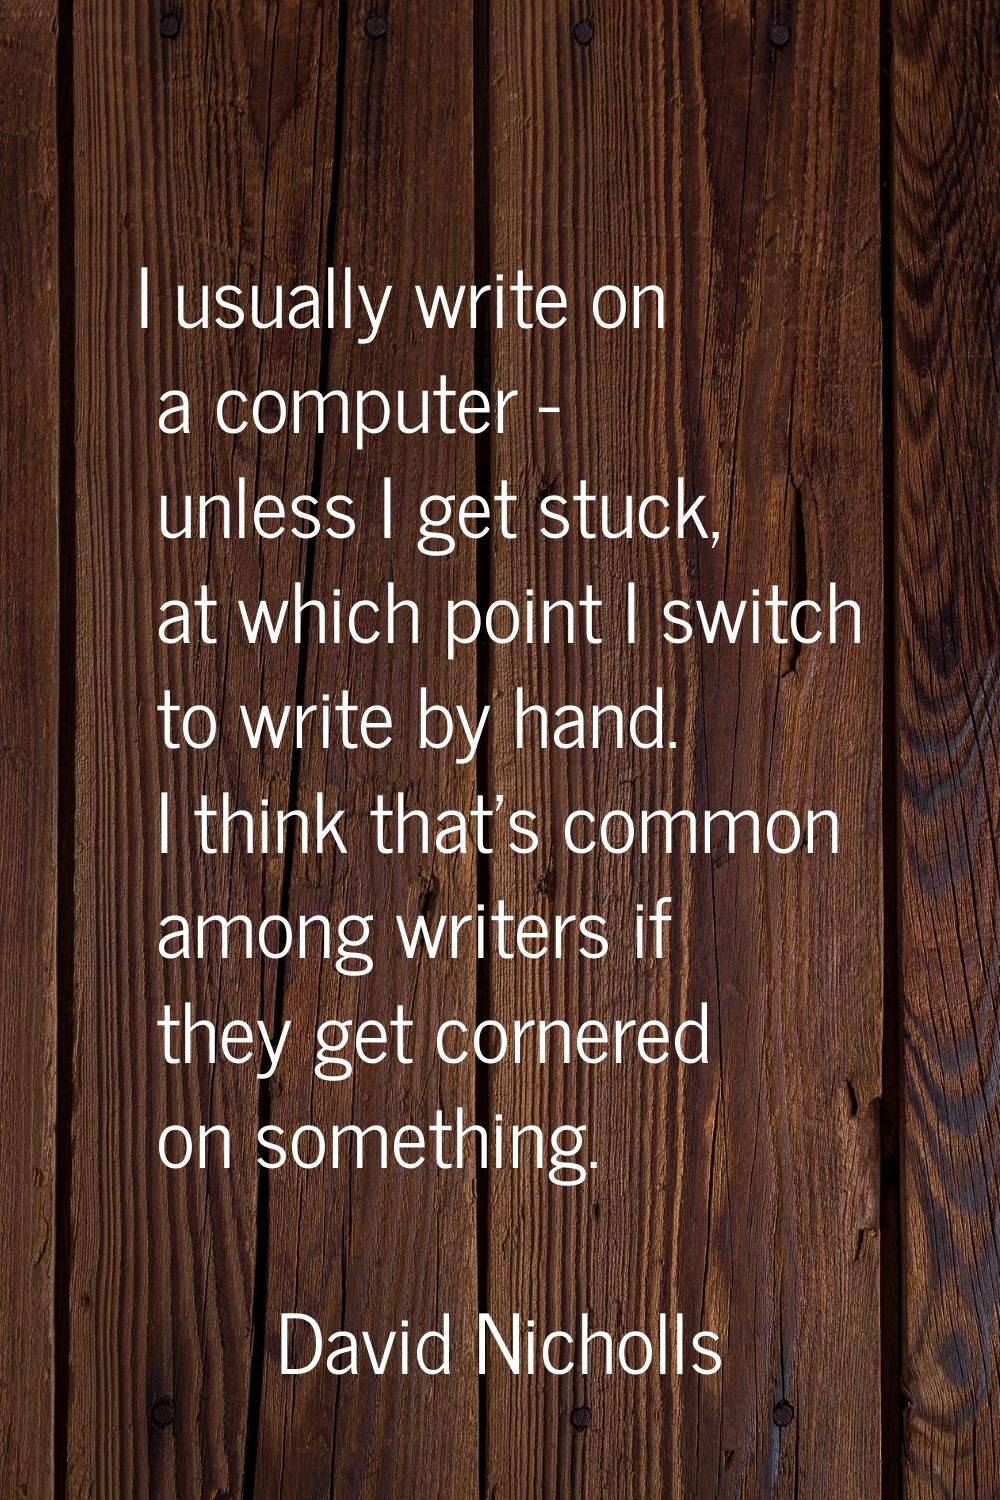 I usually write on a computer - unless I get stuck, at which point I switch to write by hand. I thi